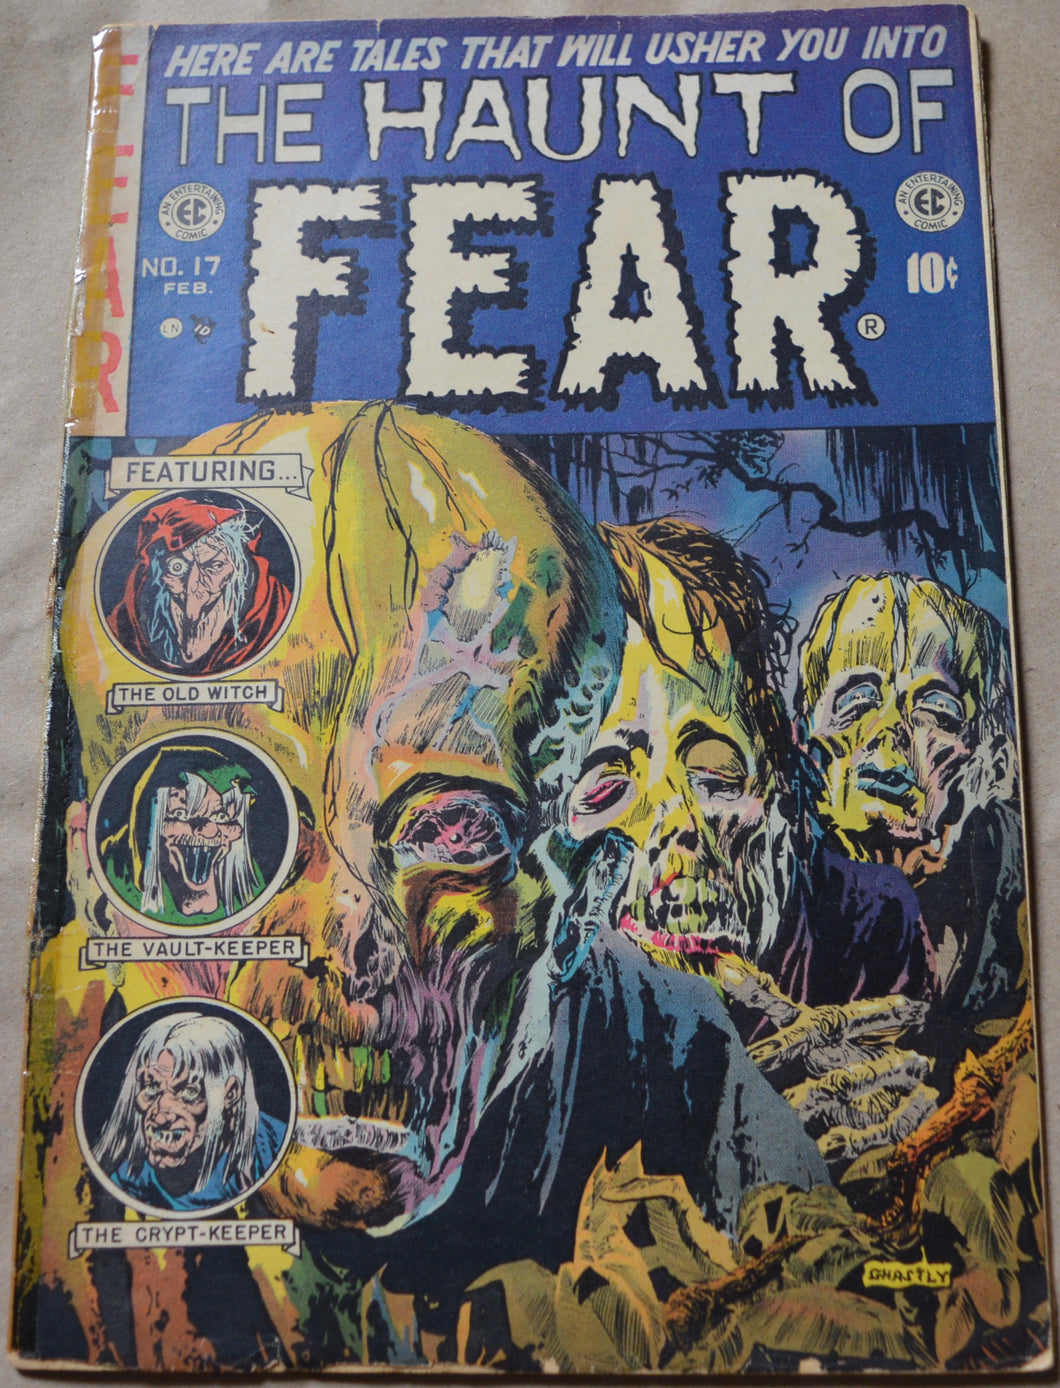 HAUNT OF FEAR #17 (EC, 1953) Classic cover by Graham Ingels